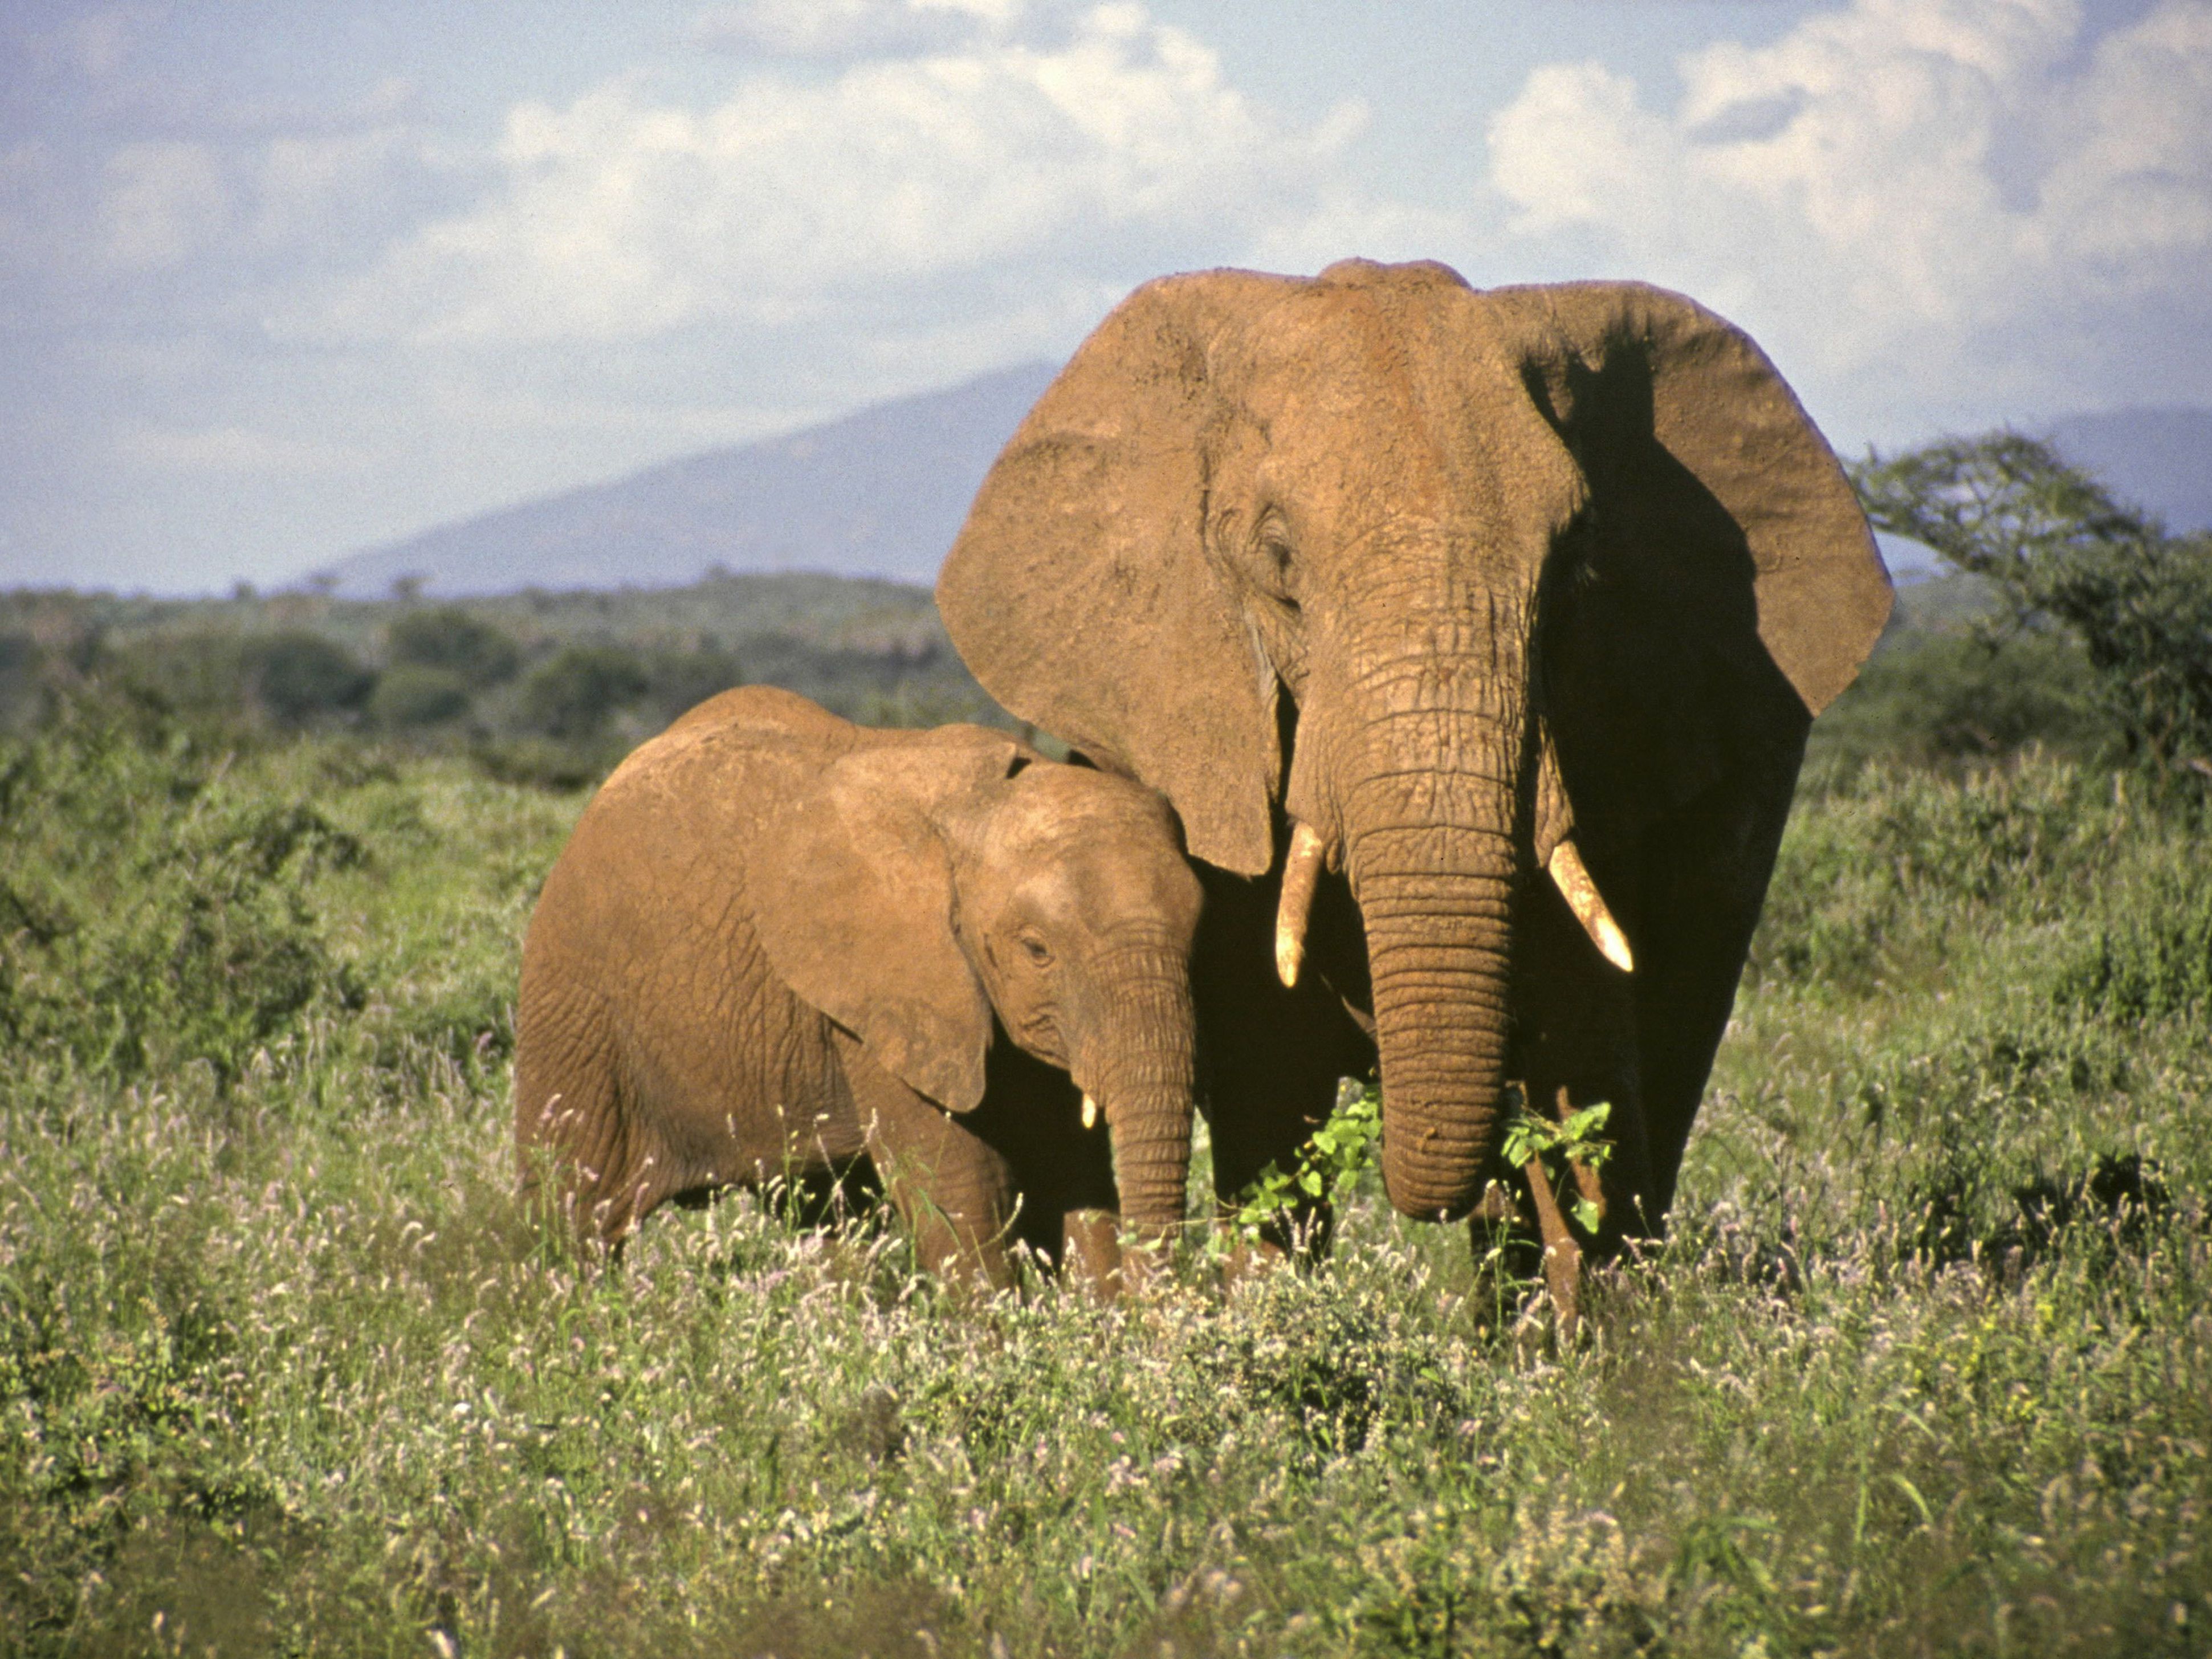 How long does a baby elephant stay with its mother?